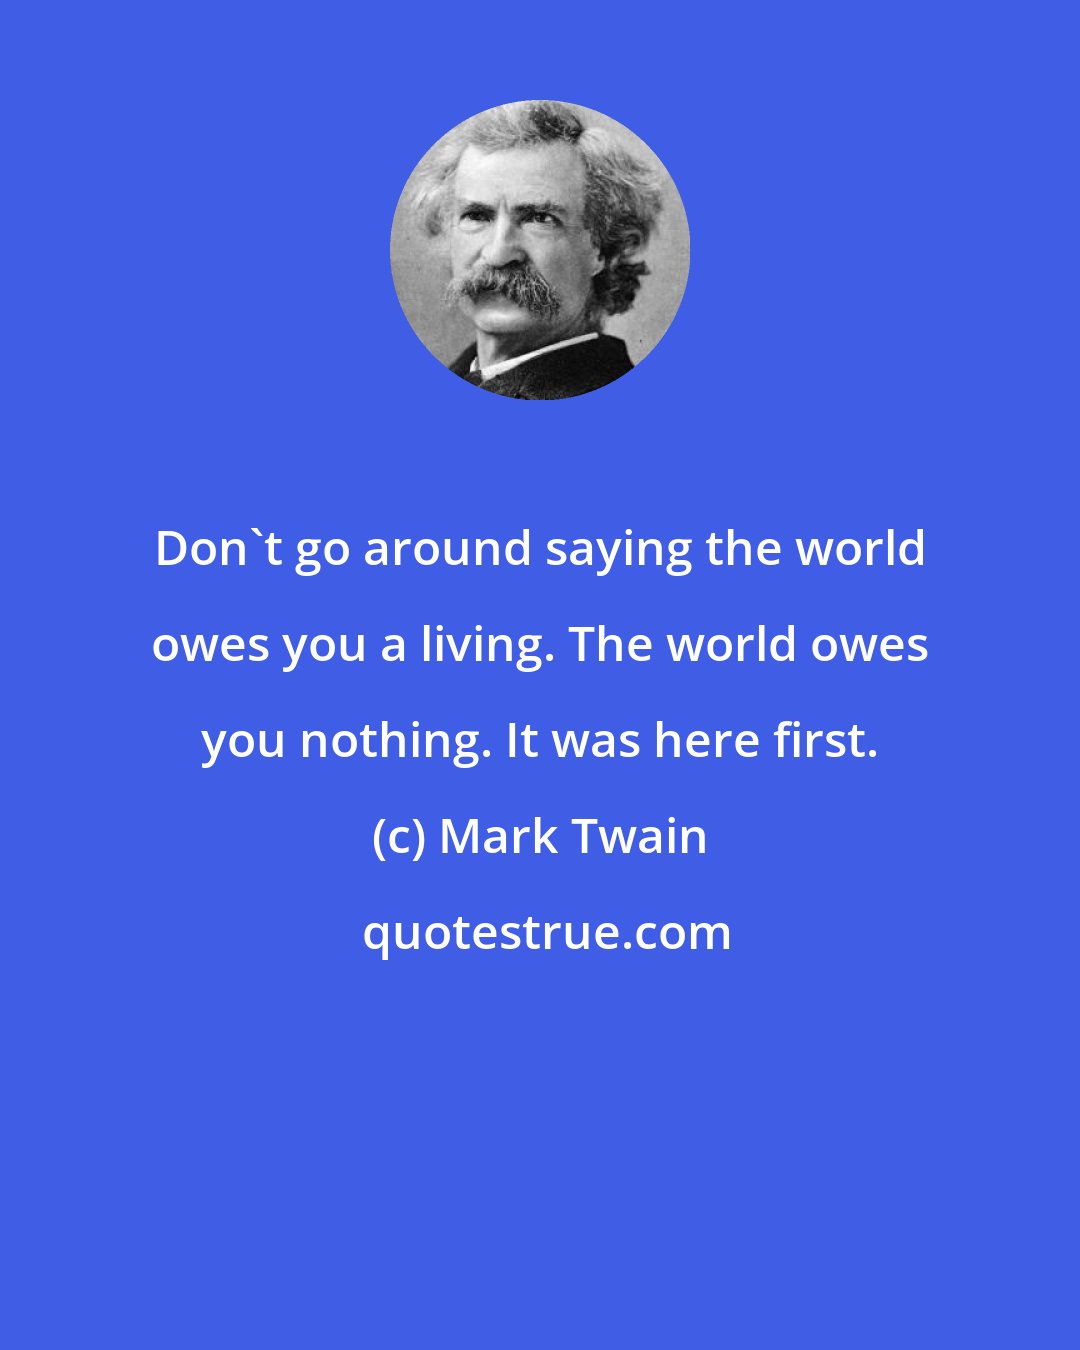 Mark Twain: Don't go around saying the world owes you a living. The world owes you nothing. It was here first.